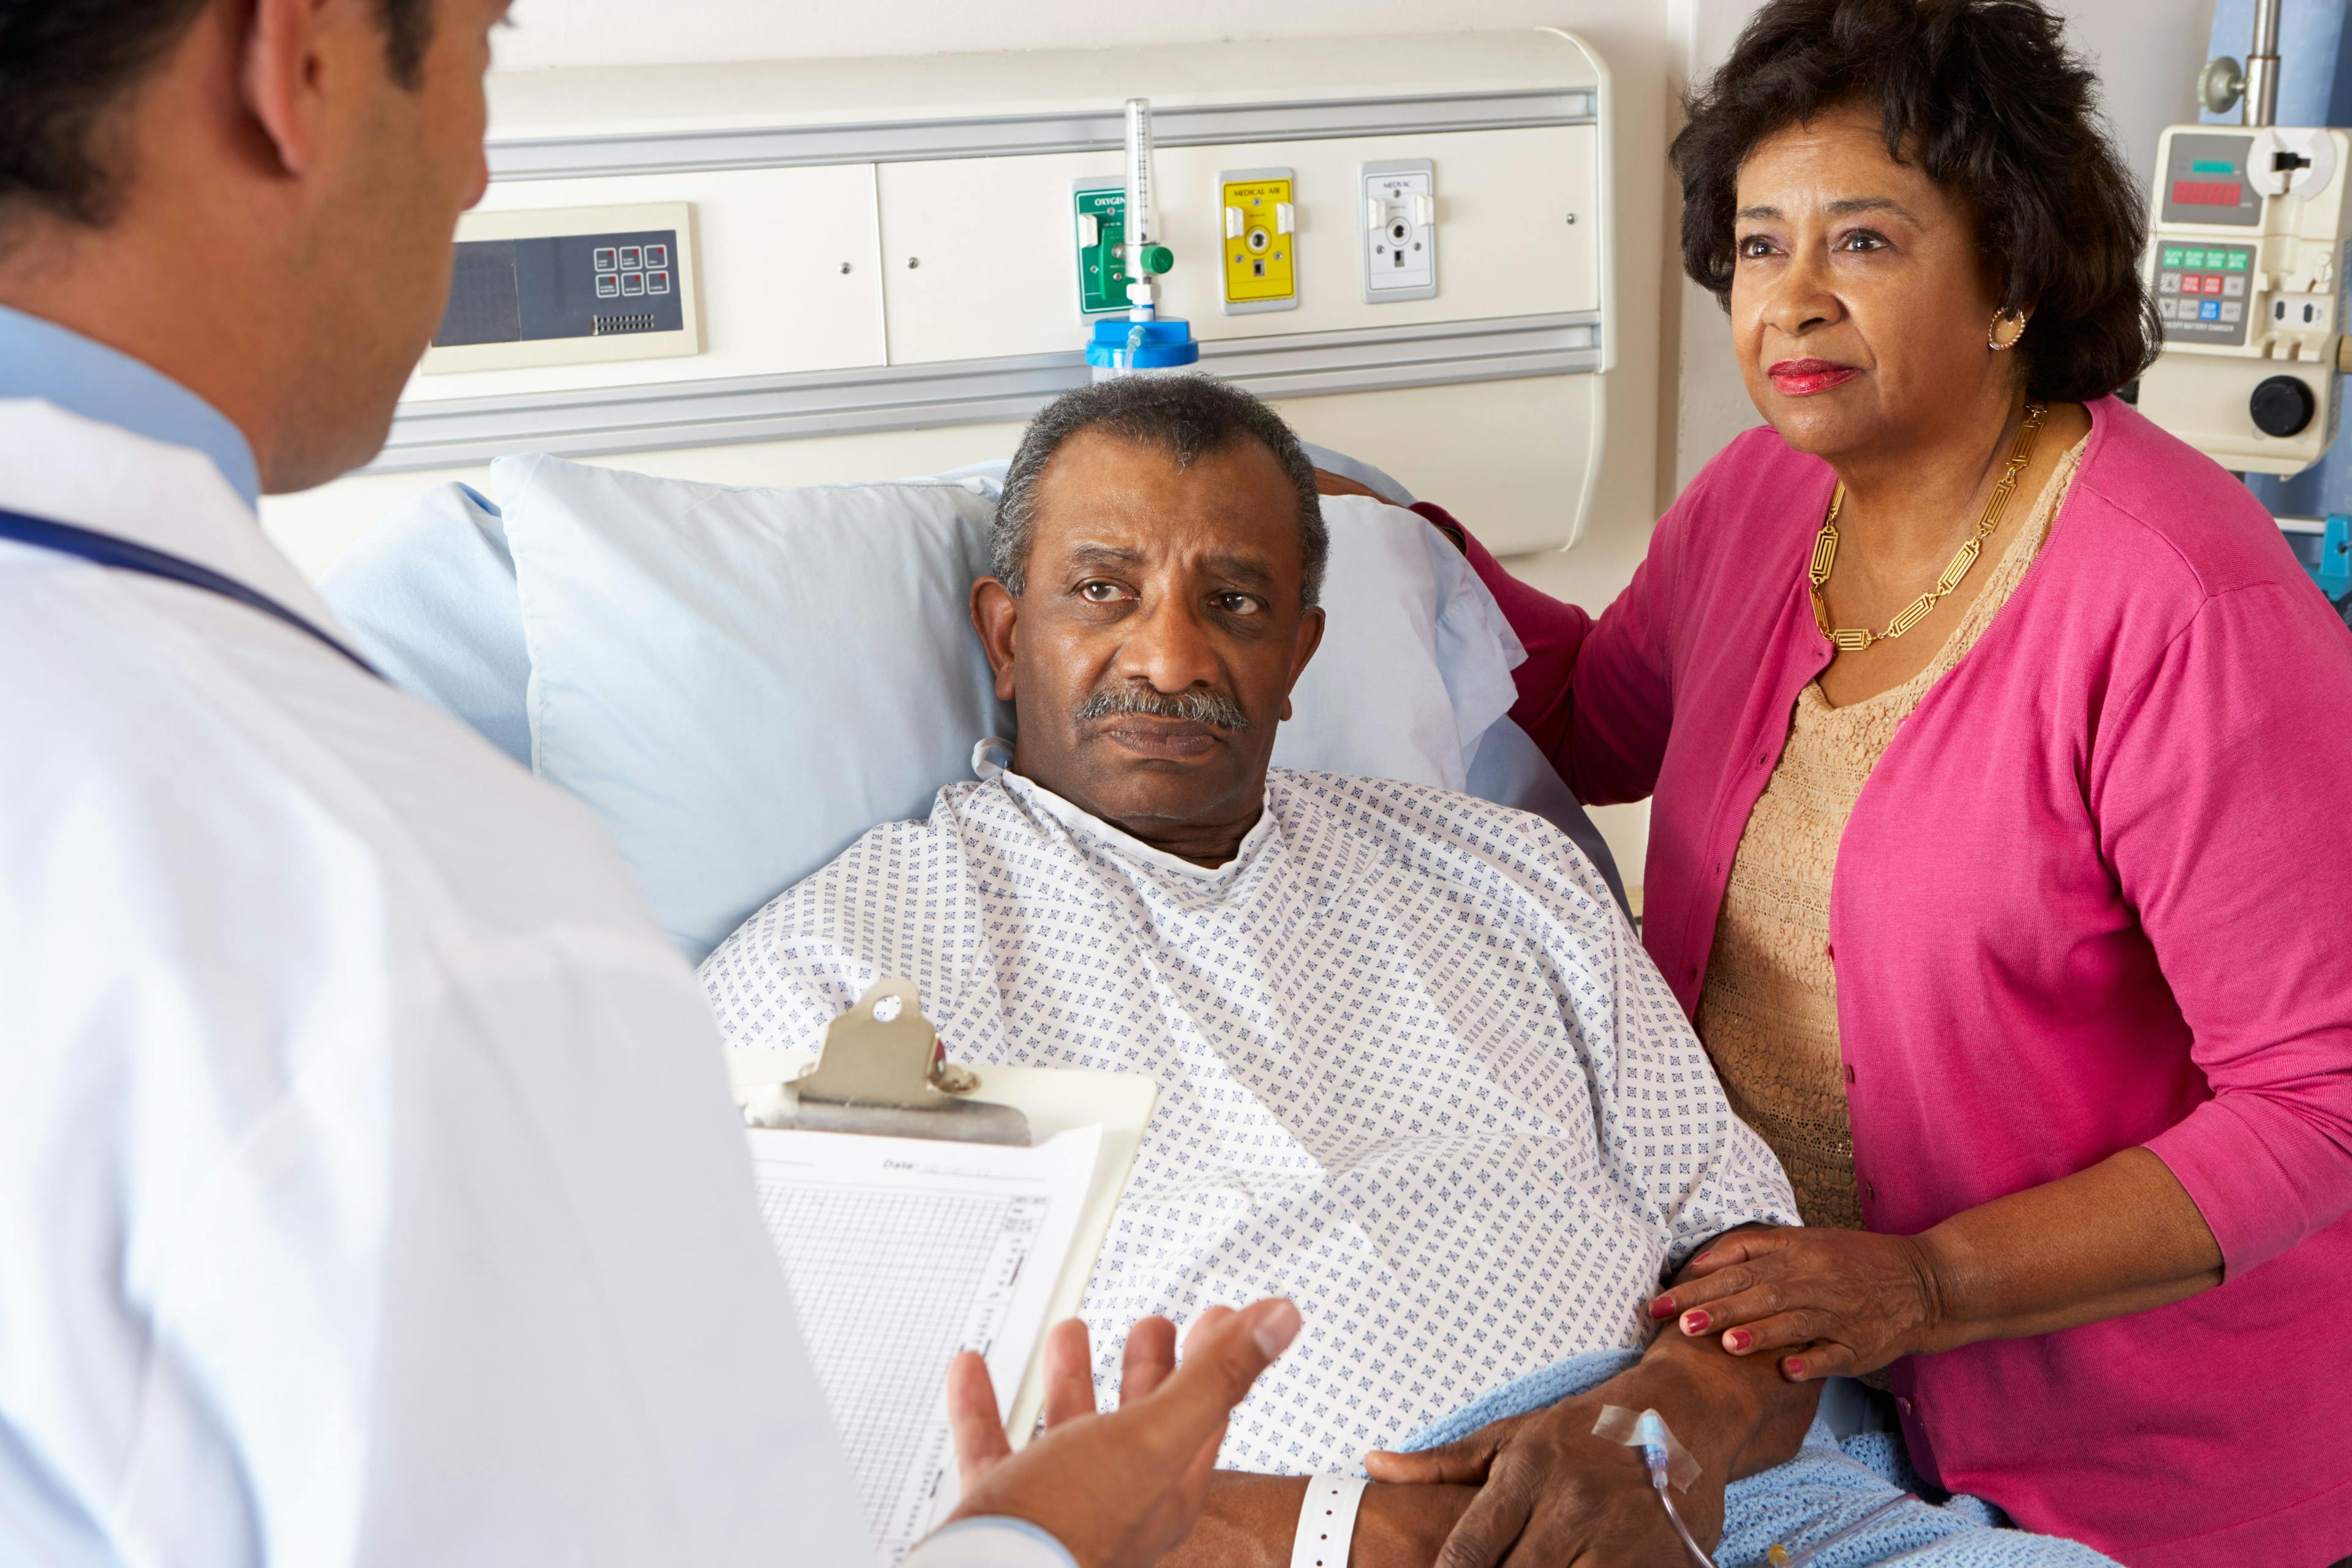 Black Medicare Patients 4% More Likely to Die in Decade Following Stroke than White Counterparts